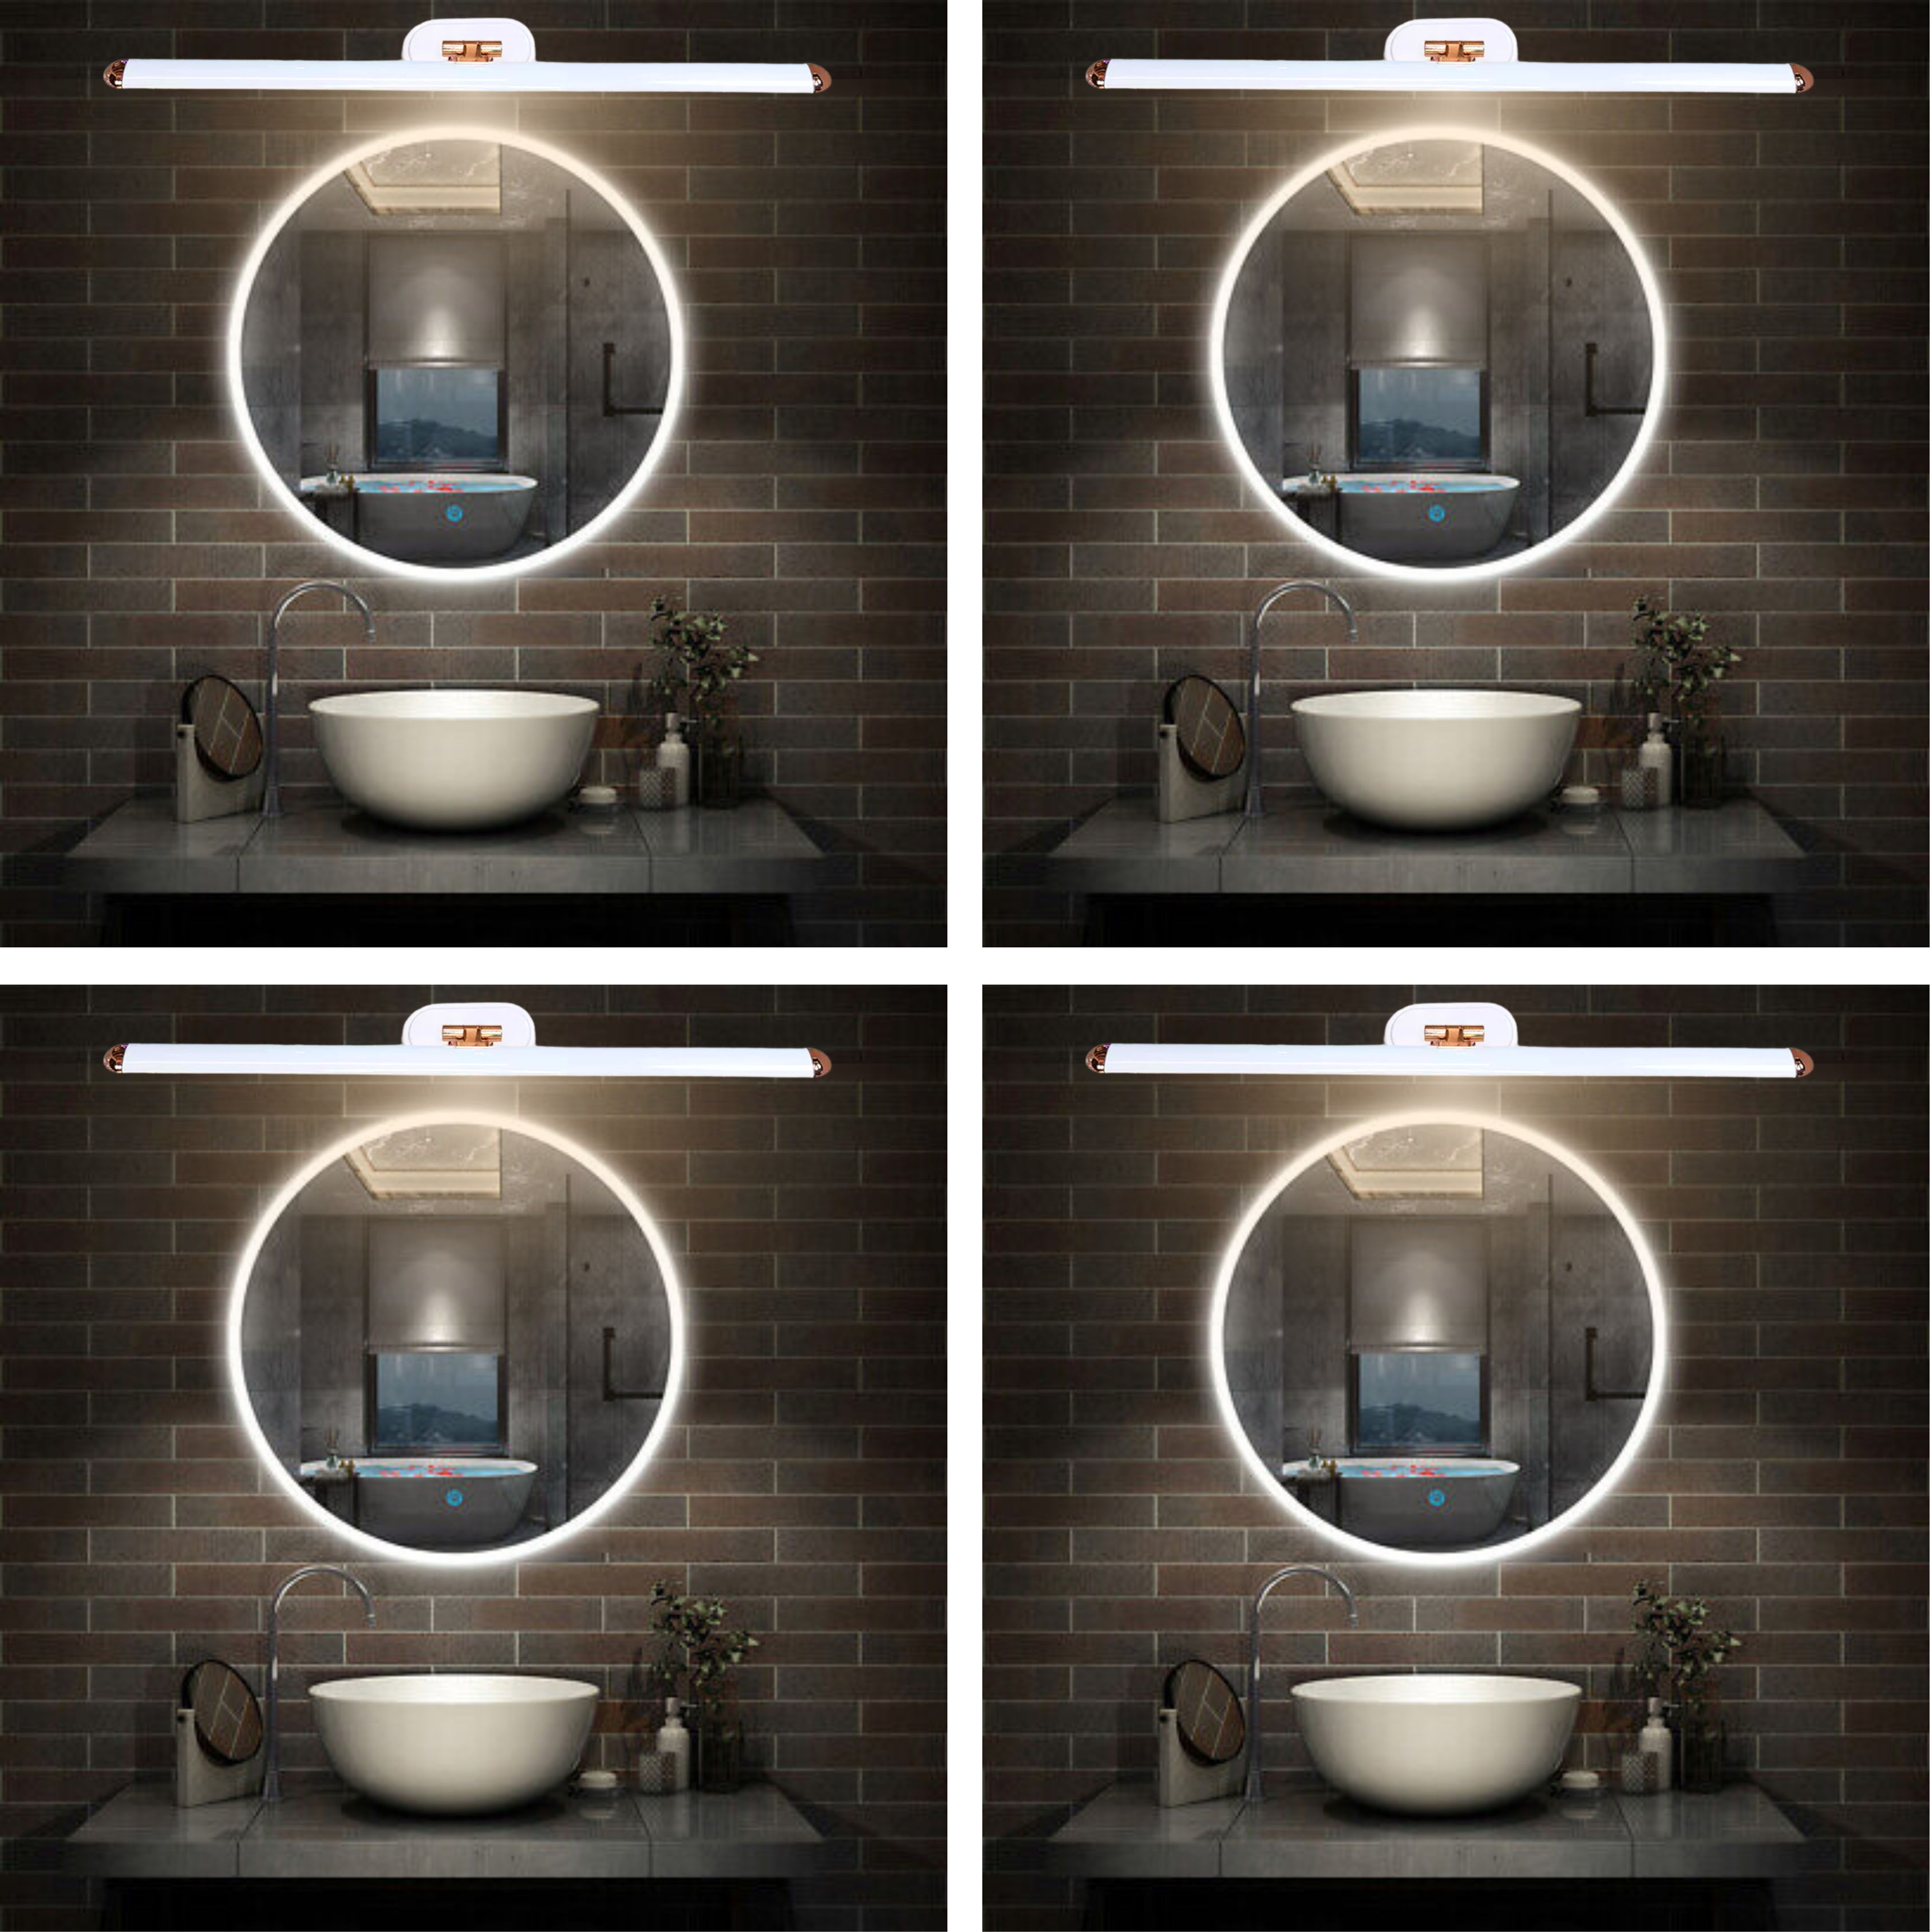 D'Mak 3in1 Color Changing LED Mirror Picture Wall Light, White Body Bathroom Vanity Led Mirror Light